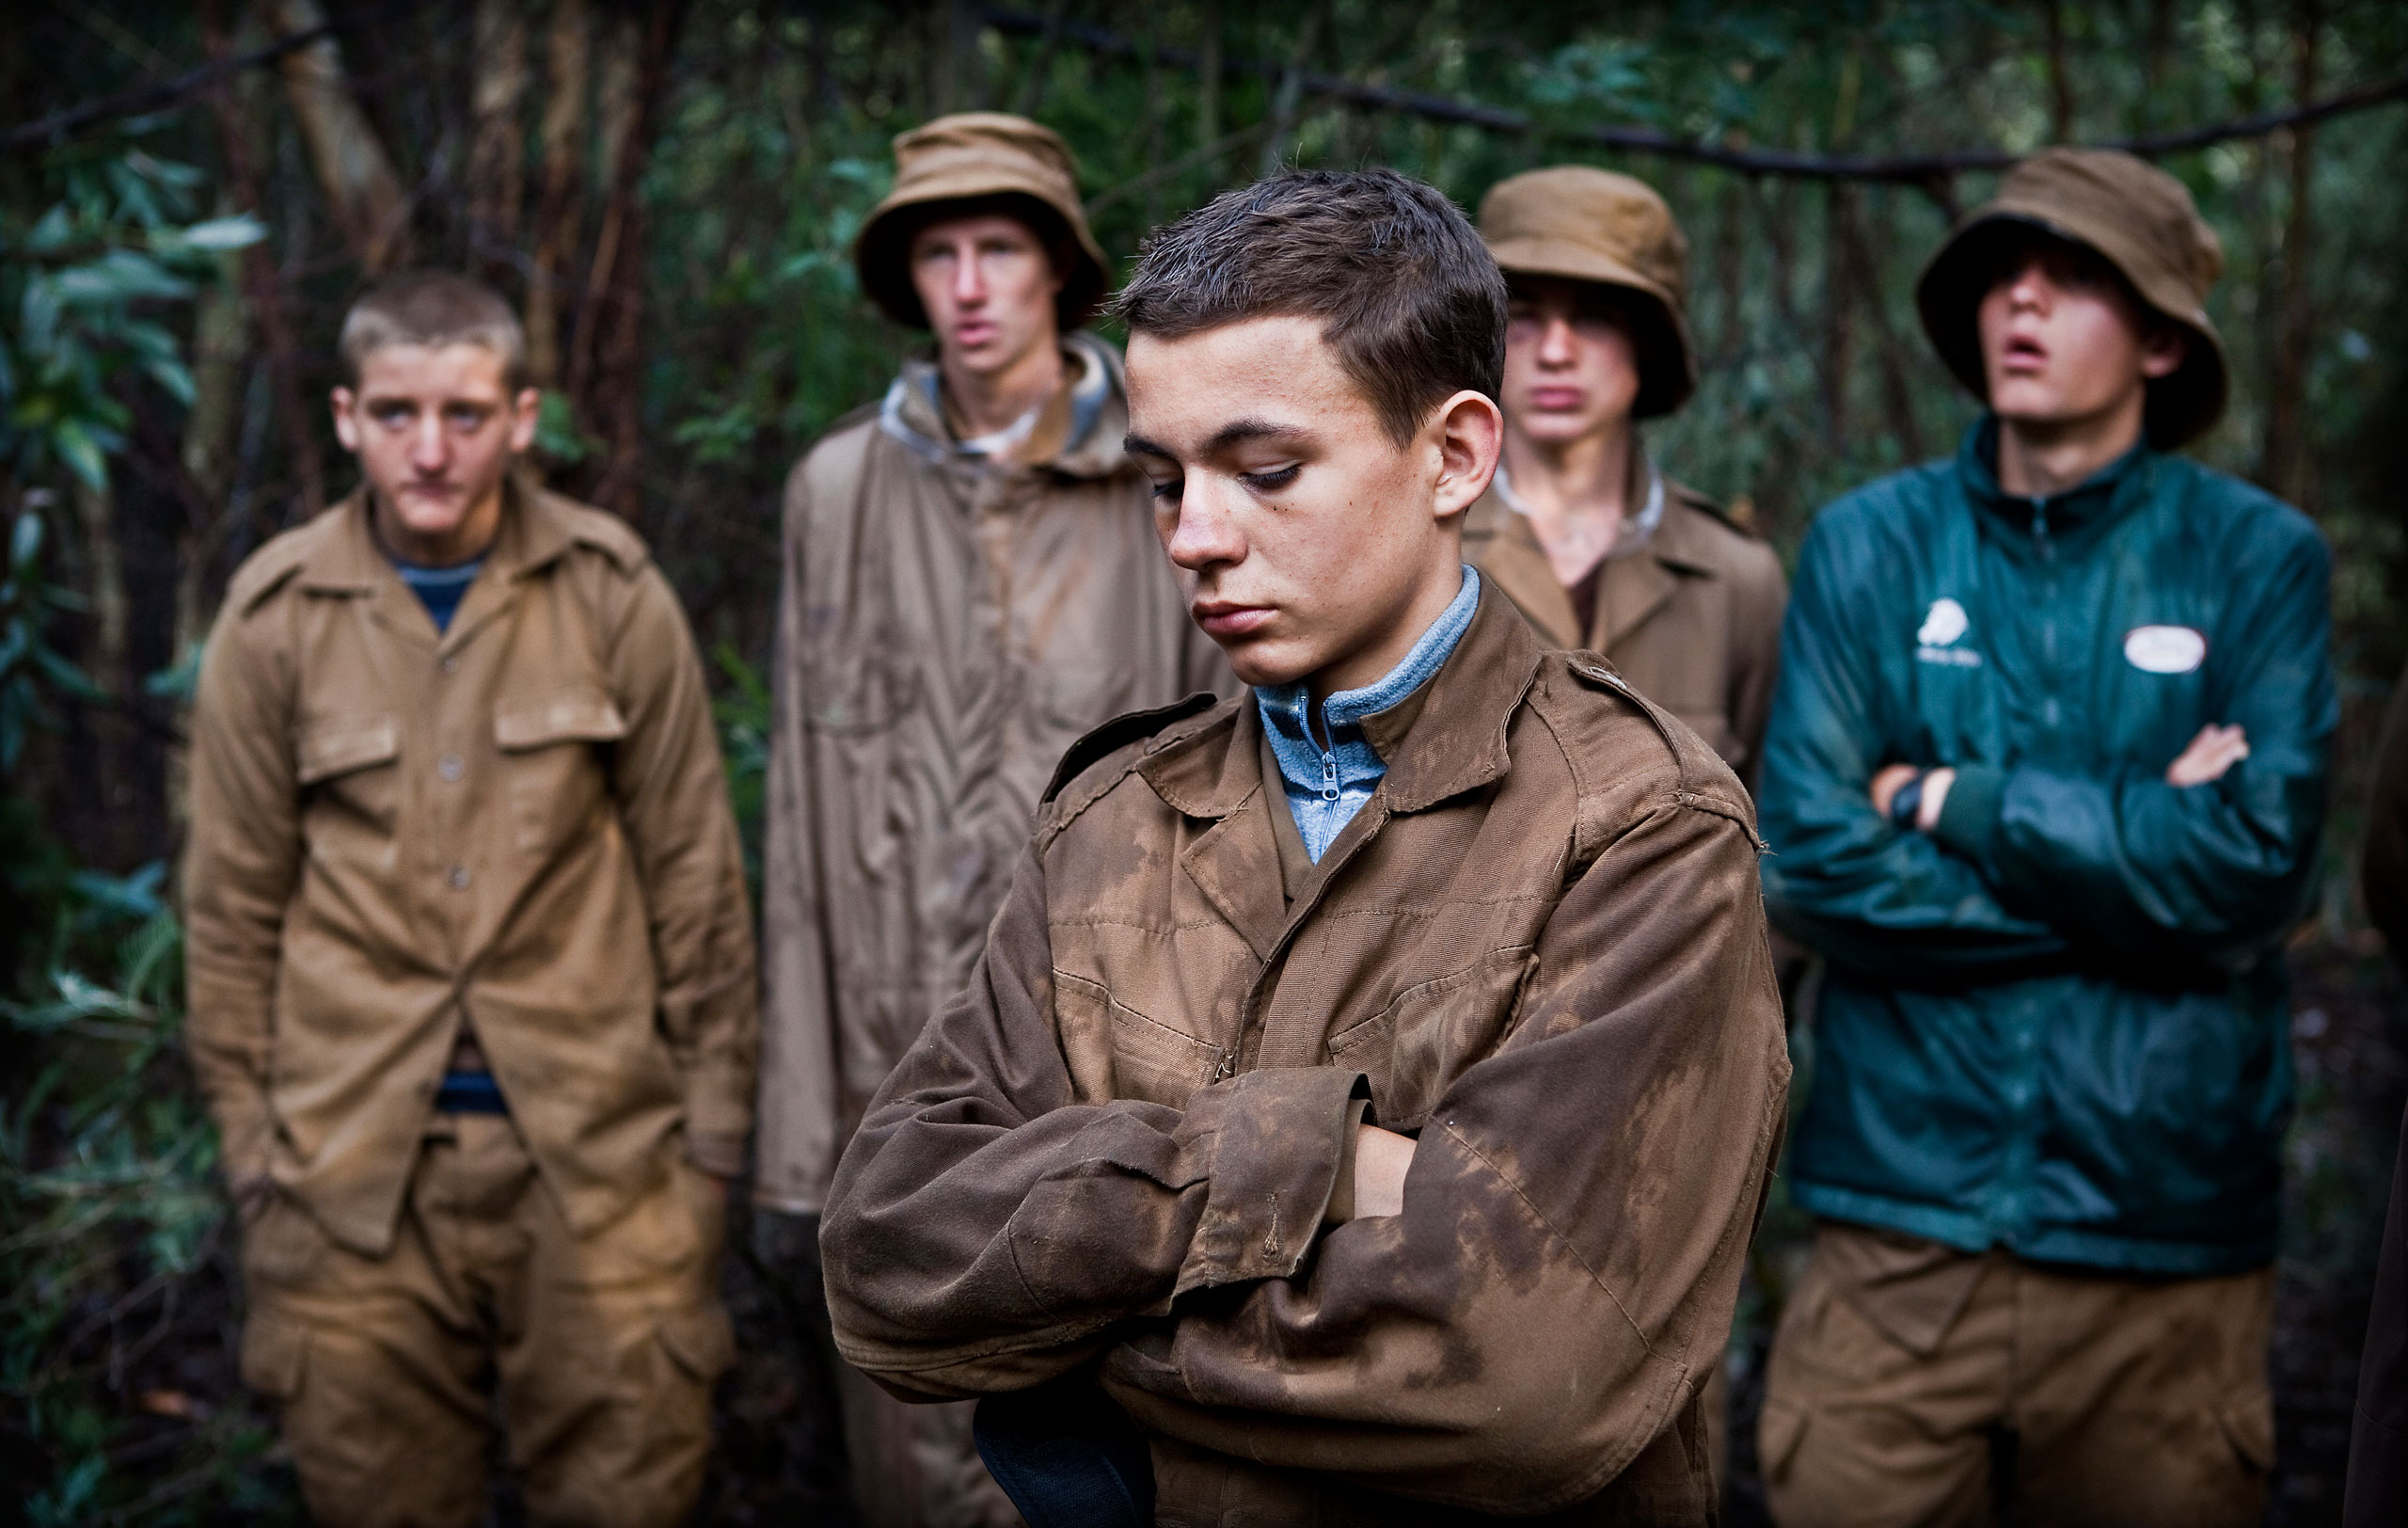 E.C. (16), stands in the woods next to the base camp. The young Afrikaners at the camp seem trapped between the ideas their parents have passed onto them and what they learn at their mixed-race schools and experience daily in the rainbow nation.